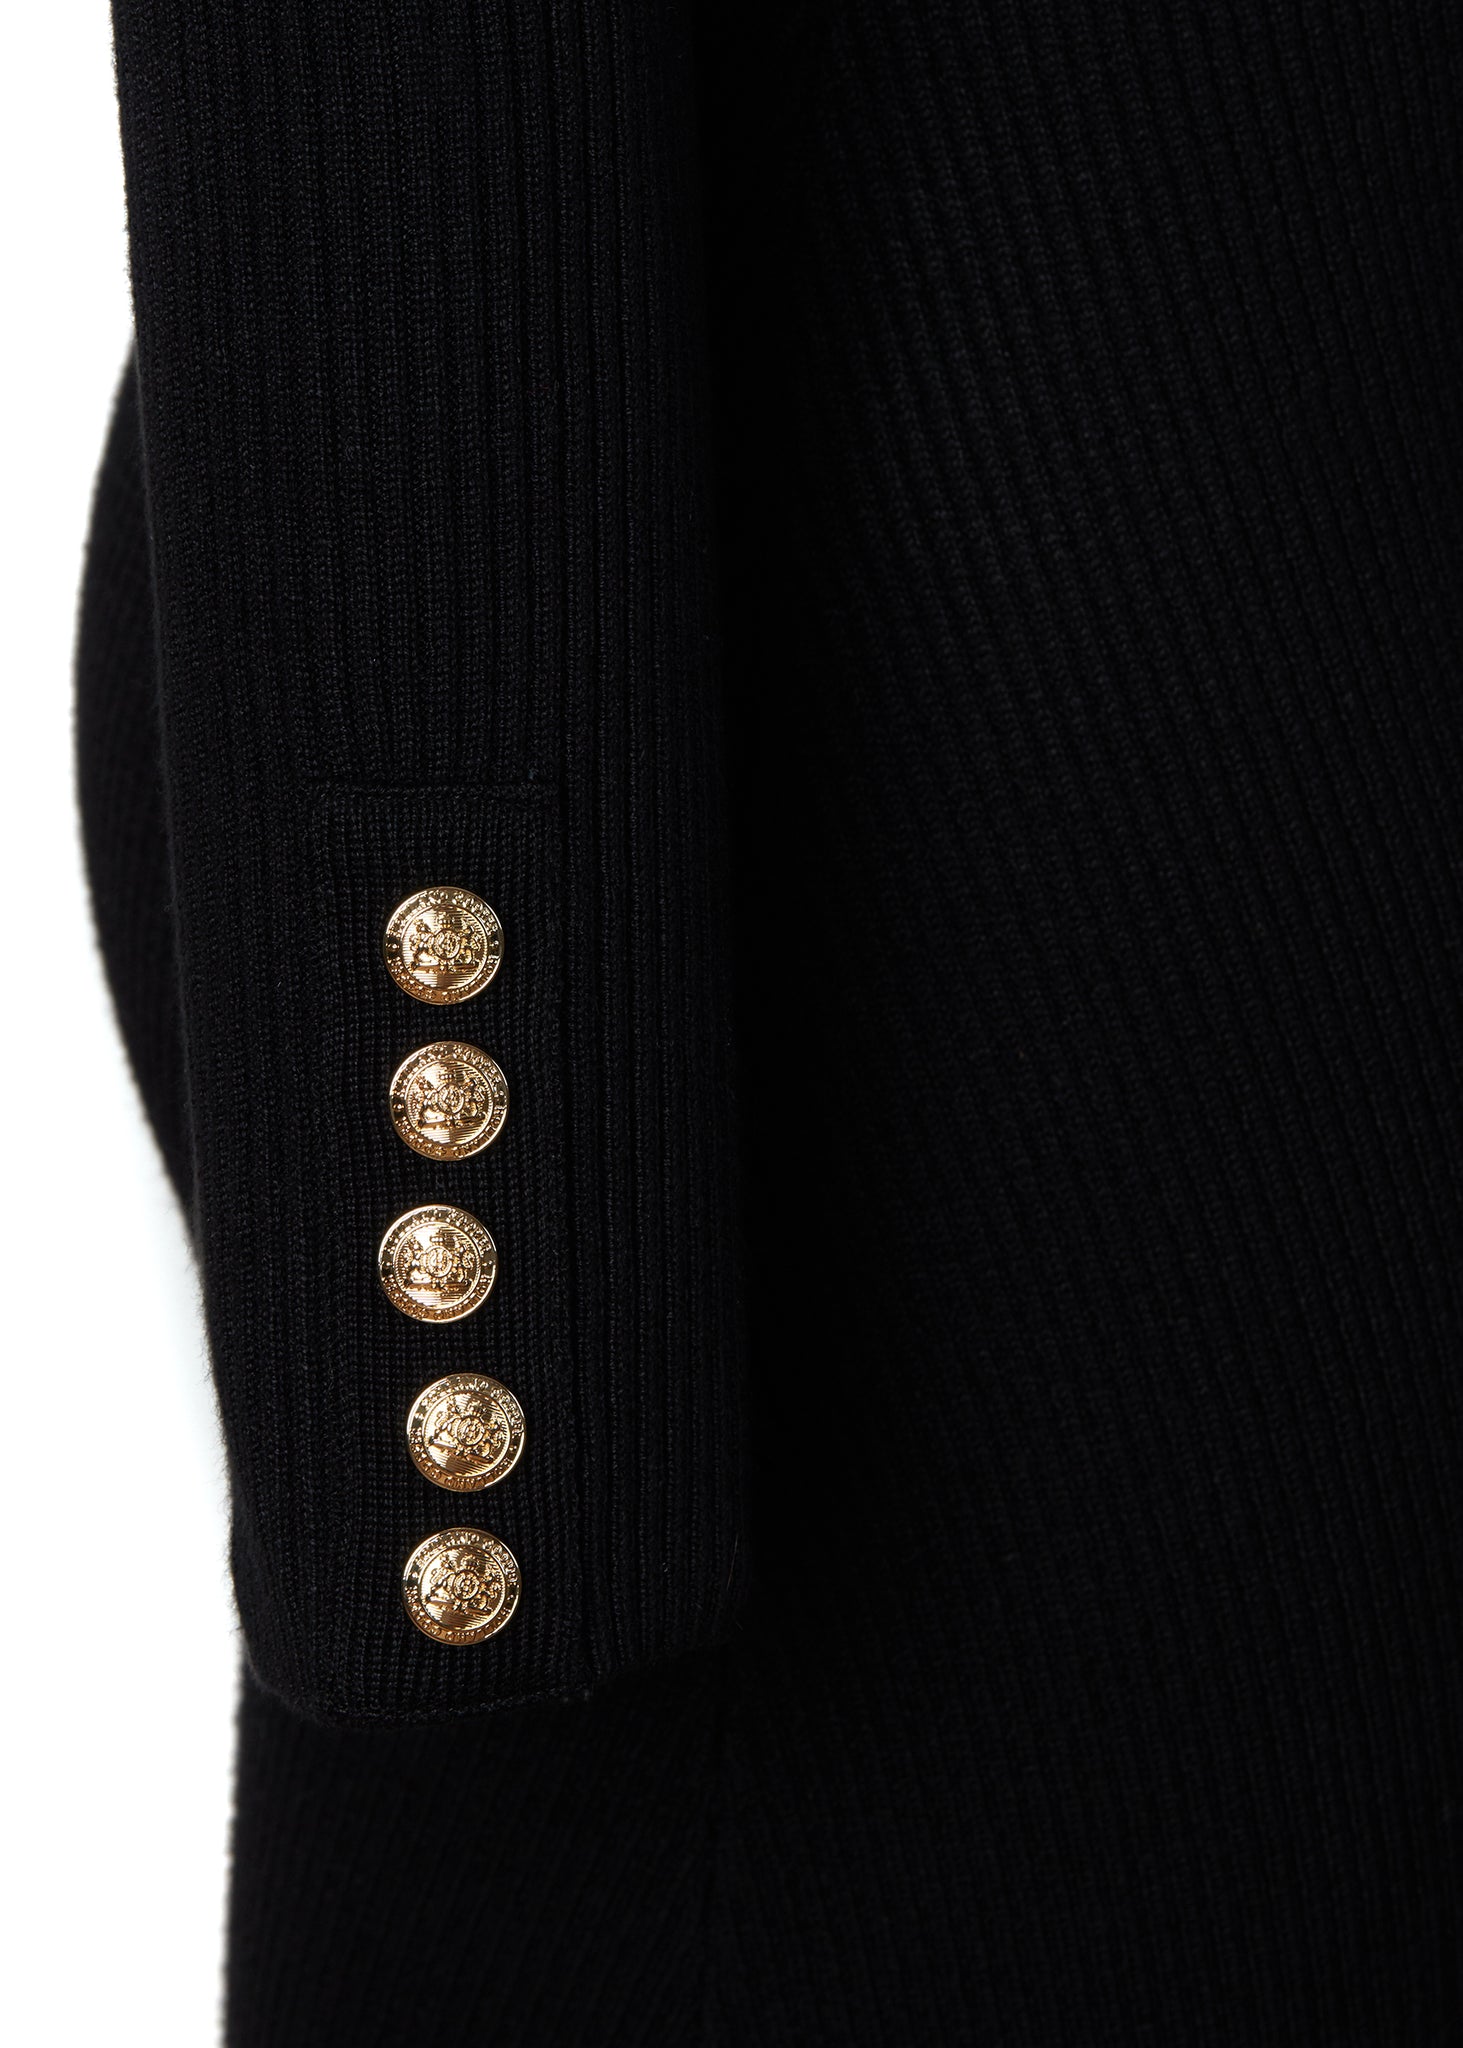 gold button detail on cuffs of womens black long sleeve knitted v neck midi dress with gold buttons on cuffs and shoulders